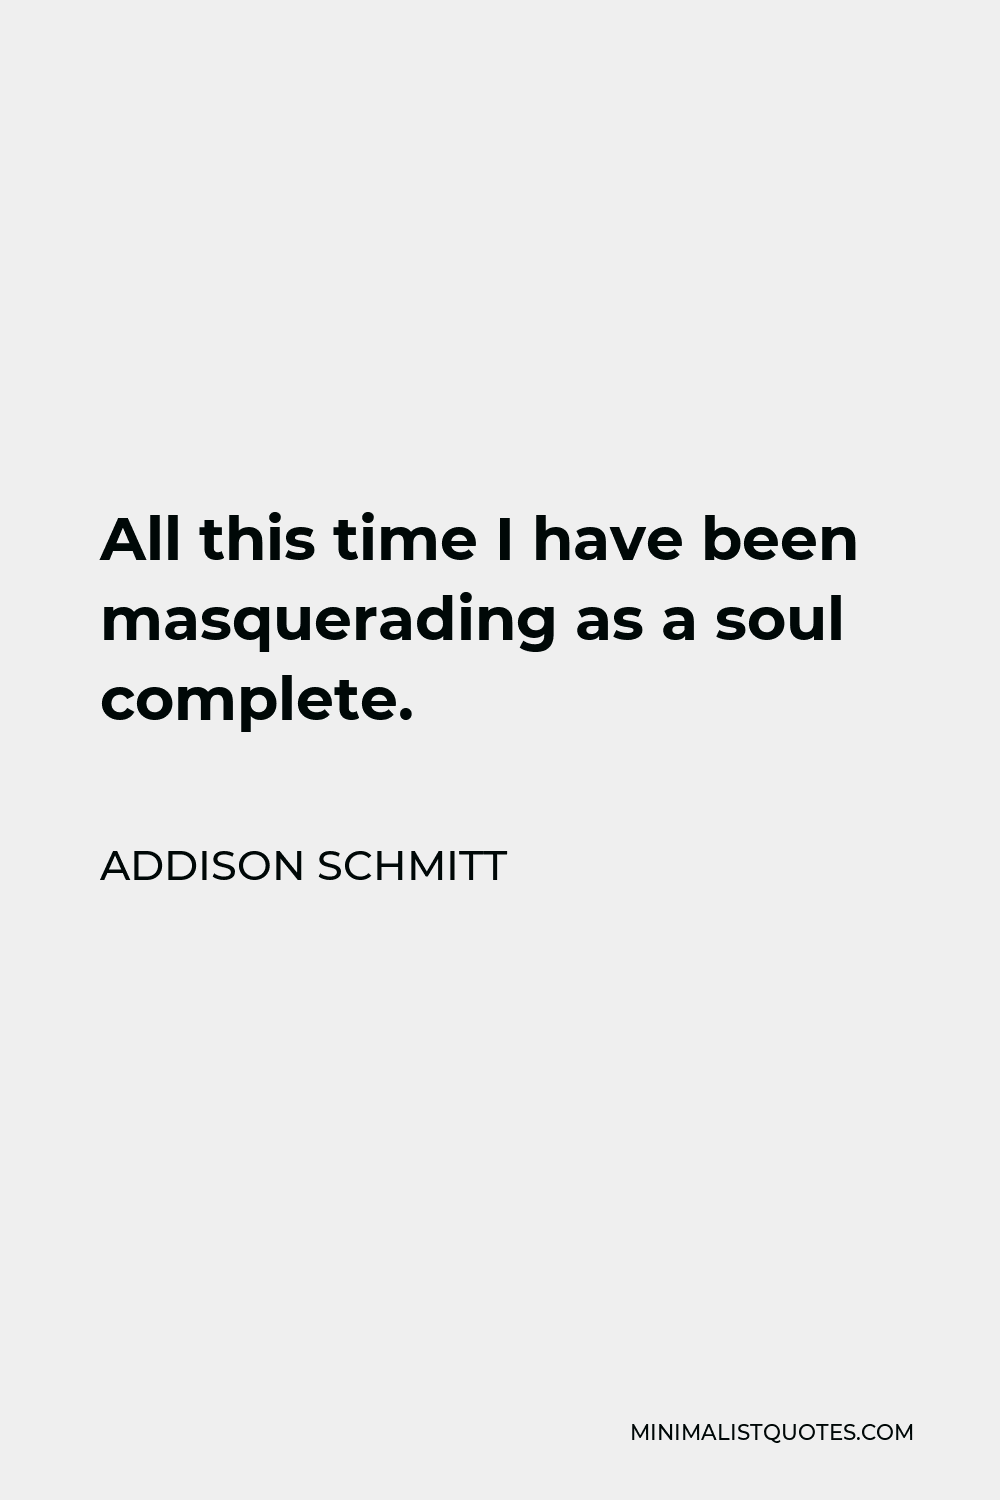 Addison Schmitt Quote - All this time I have been masquerading as a soul complete.